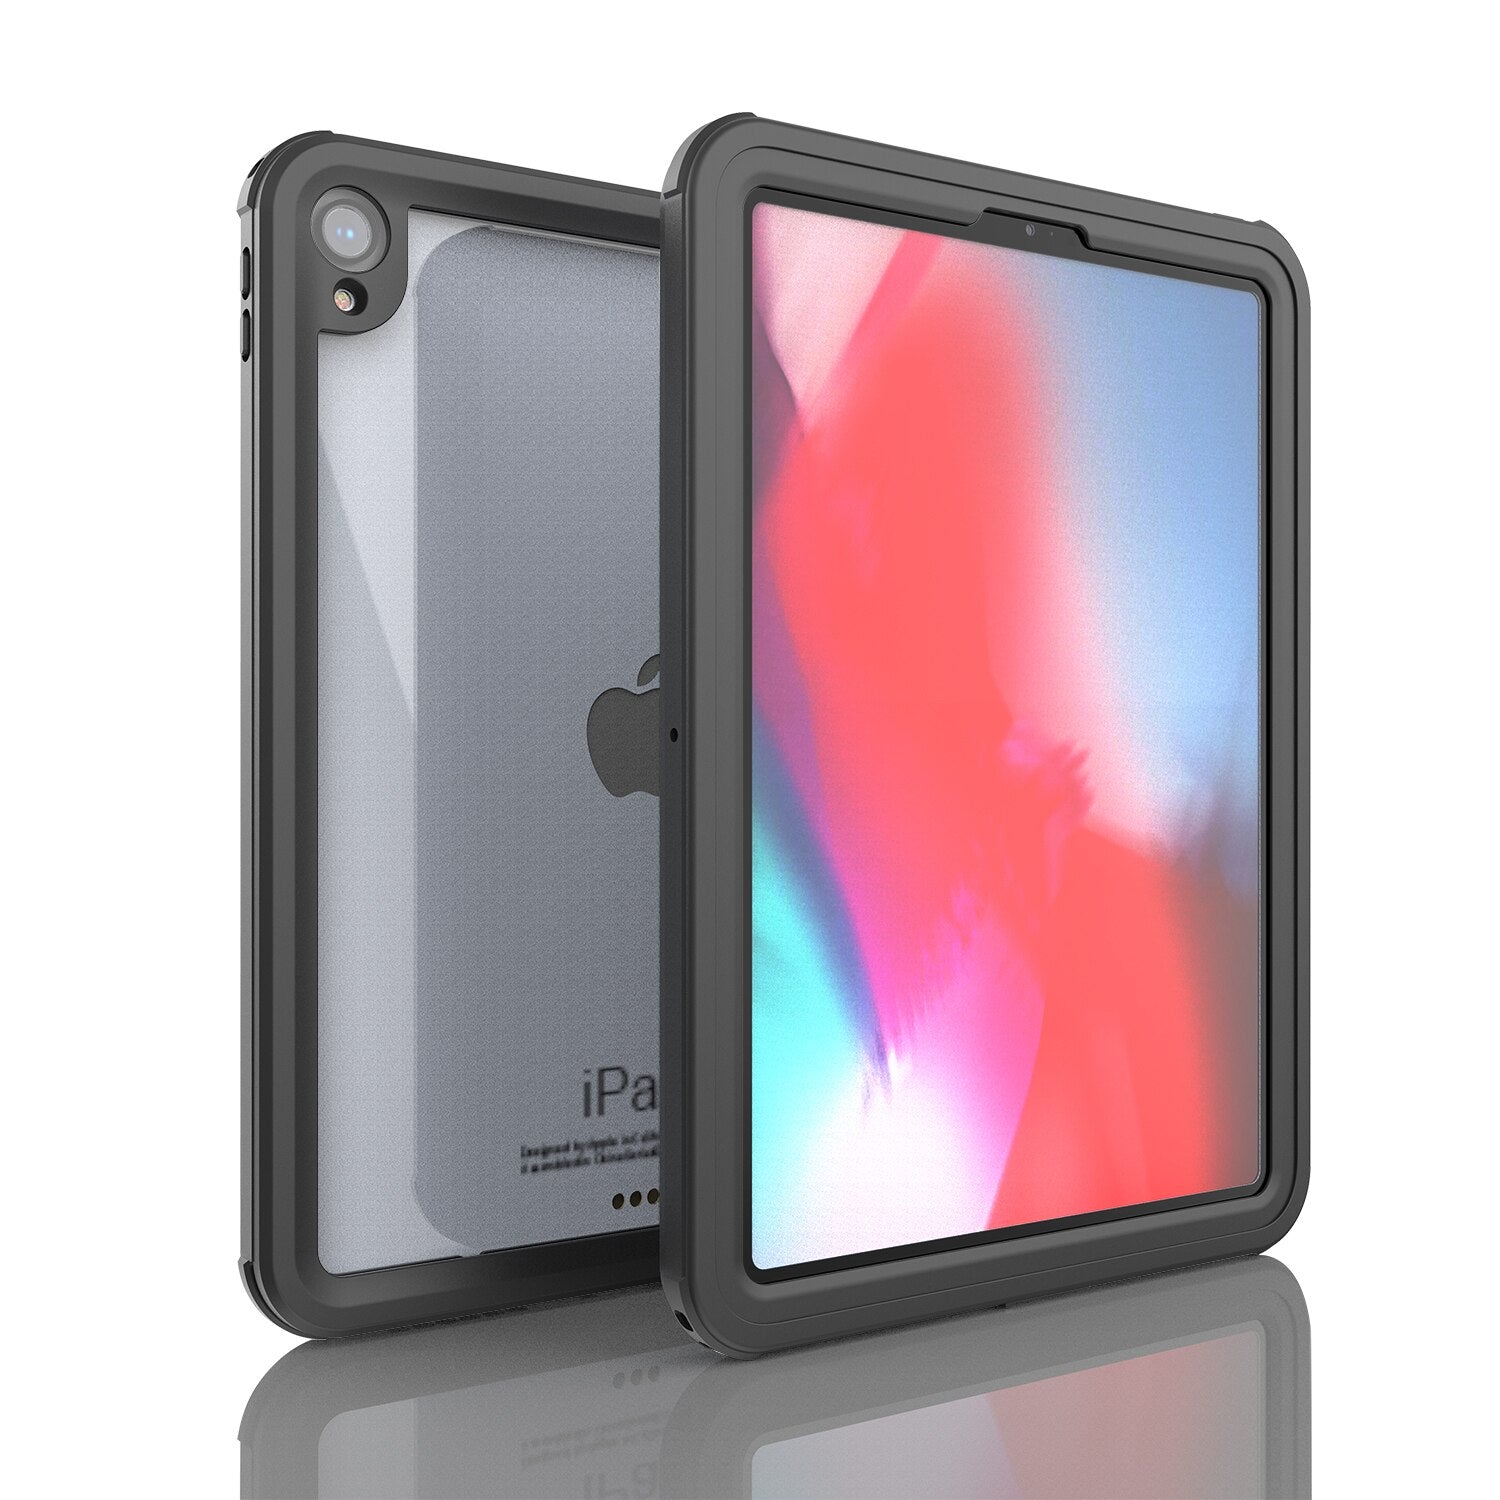 Shockproof Case For iPad 10.2 7th 2018 2017 9.7 Mini 4 5 Air 2 Air 3 Silicone Waterproof Screen Full Body 360 Protection Case - 200001091 Black / United States / iPad Air2 2014 Find Epic Store